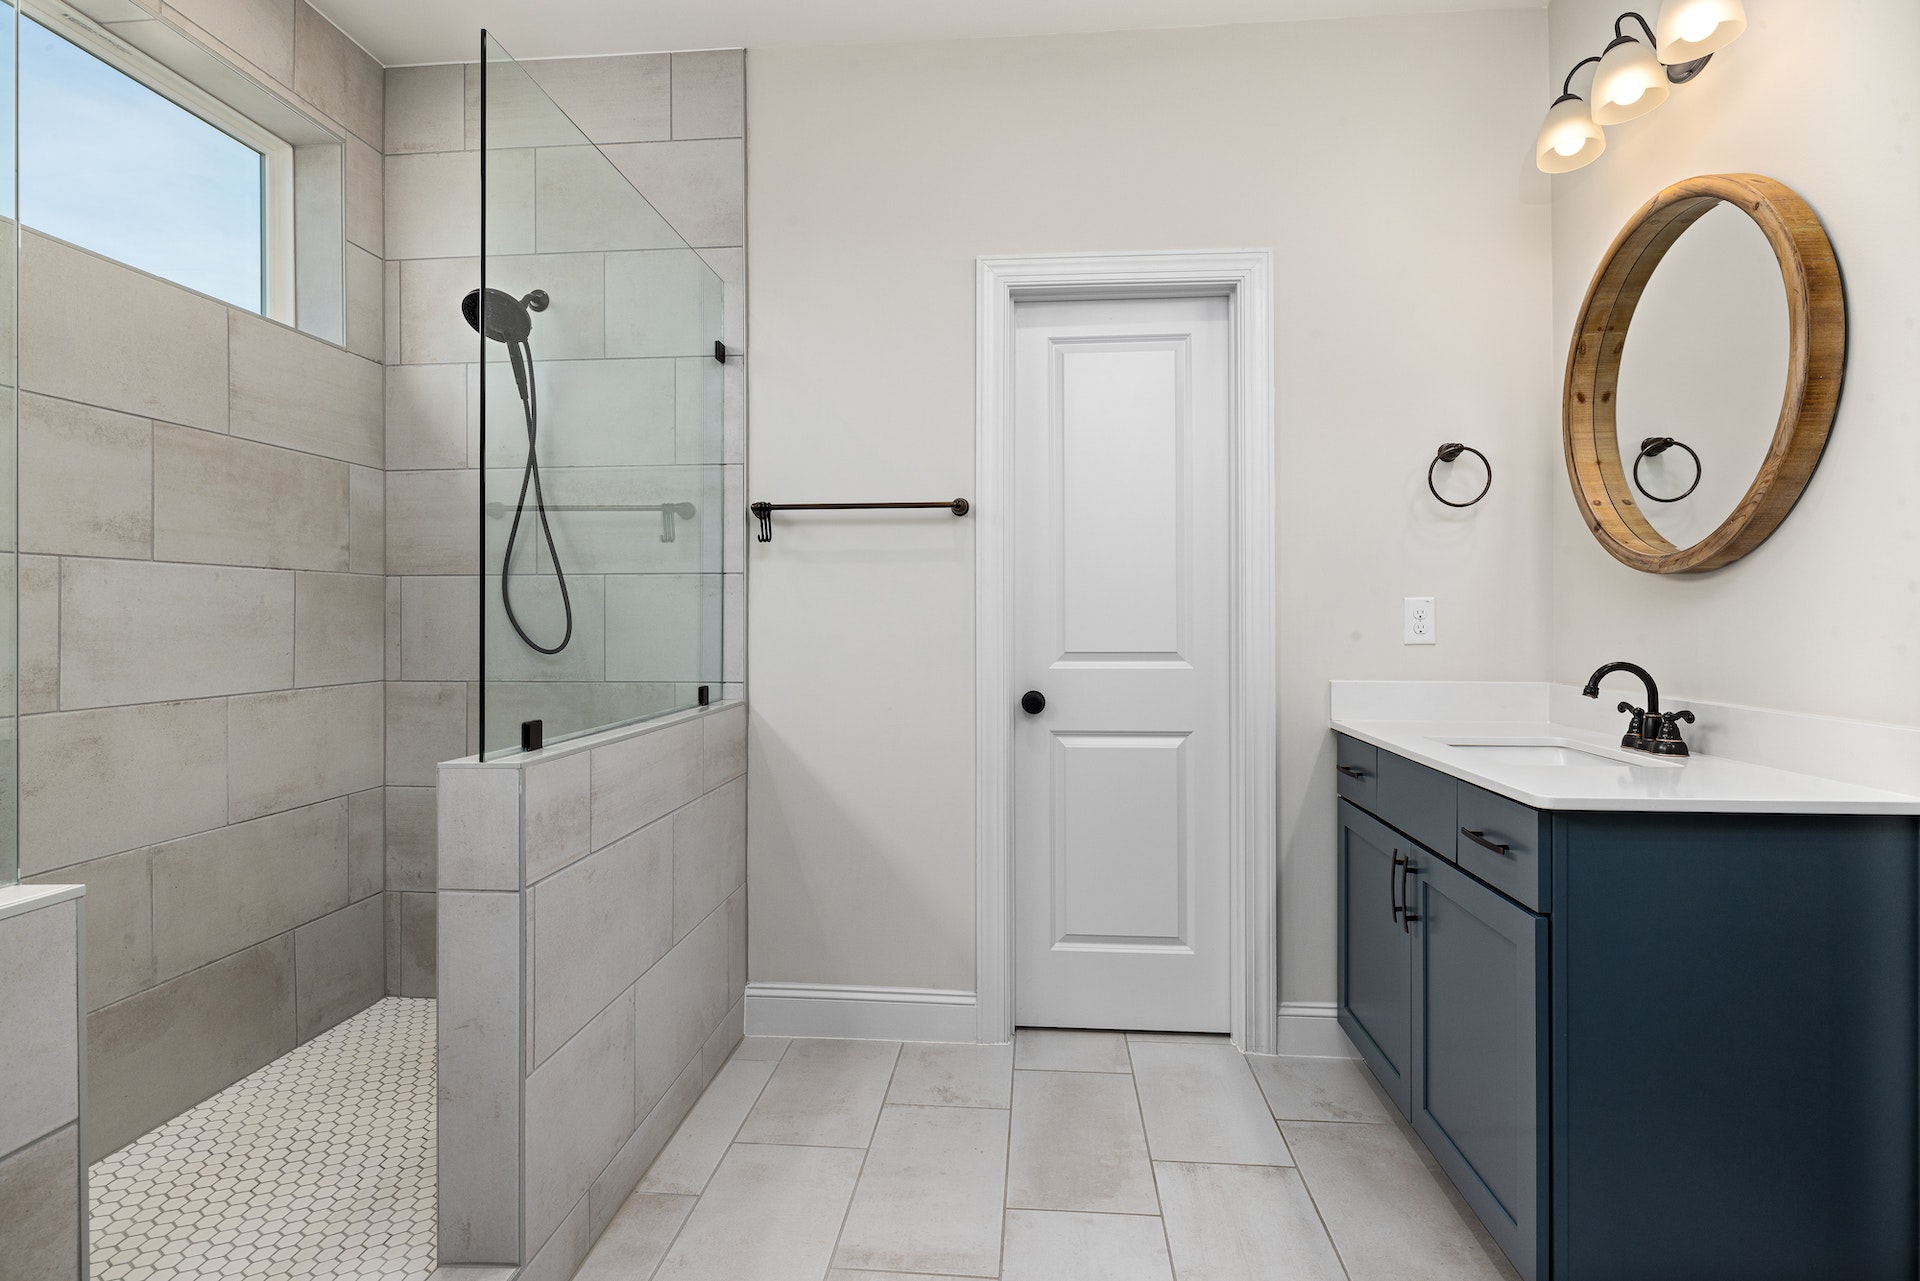 9 Bathroom Design Trends That Are Hot In 2023